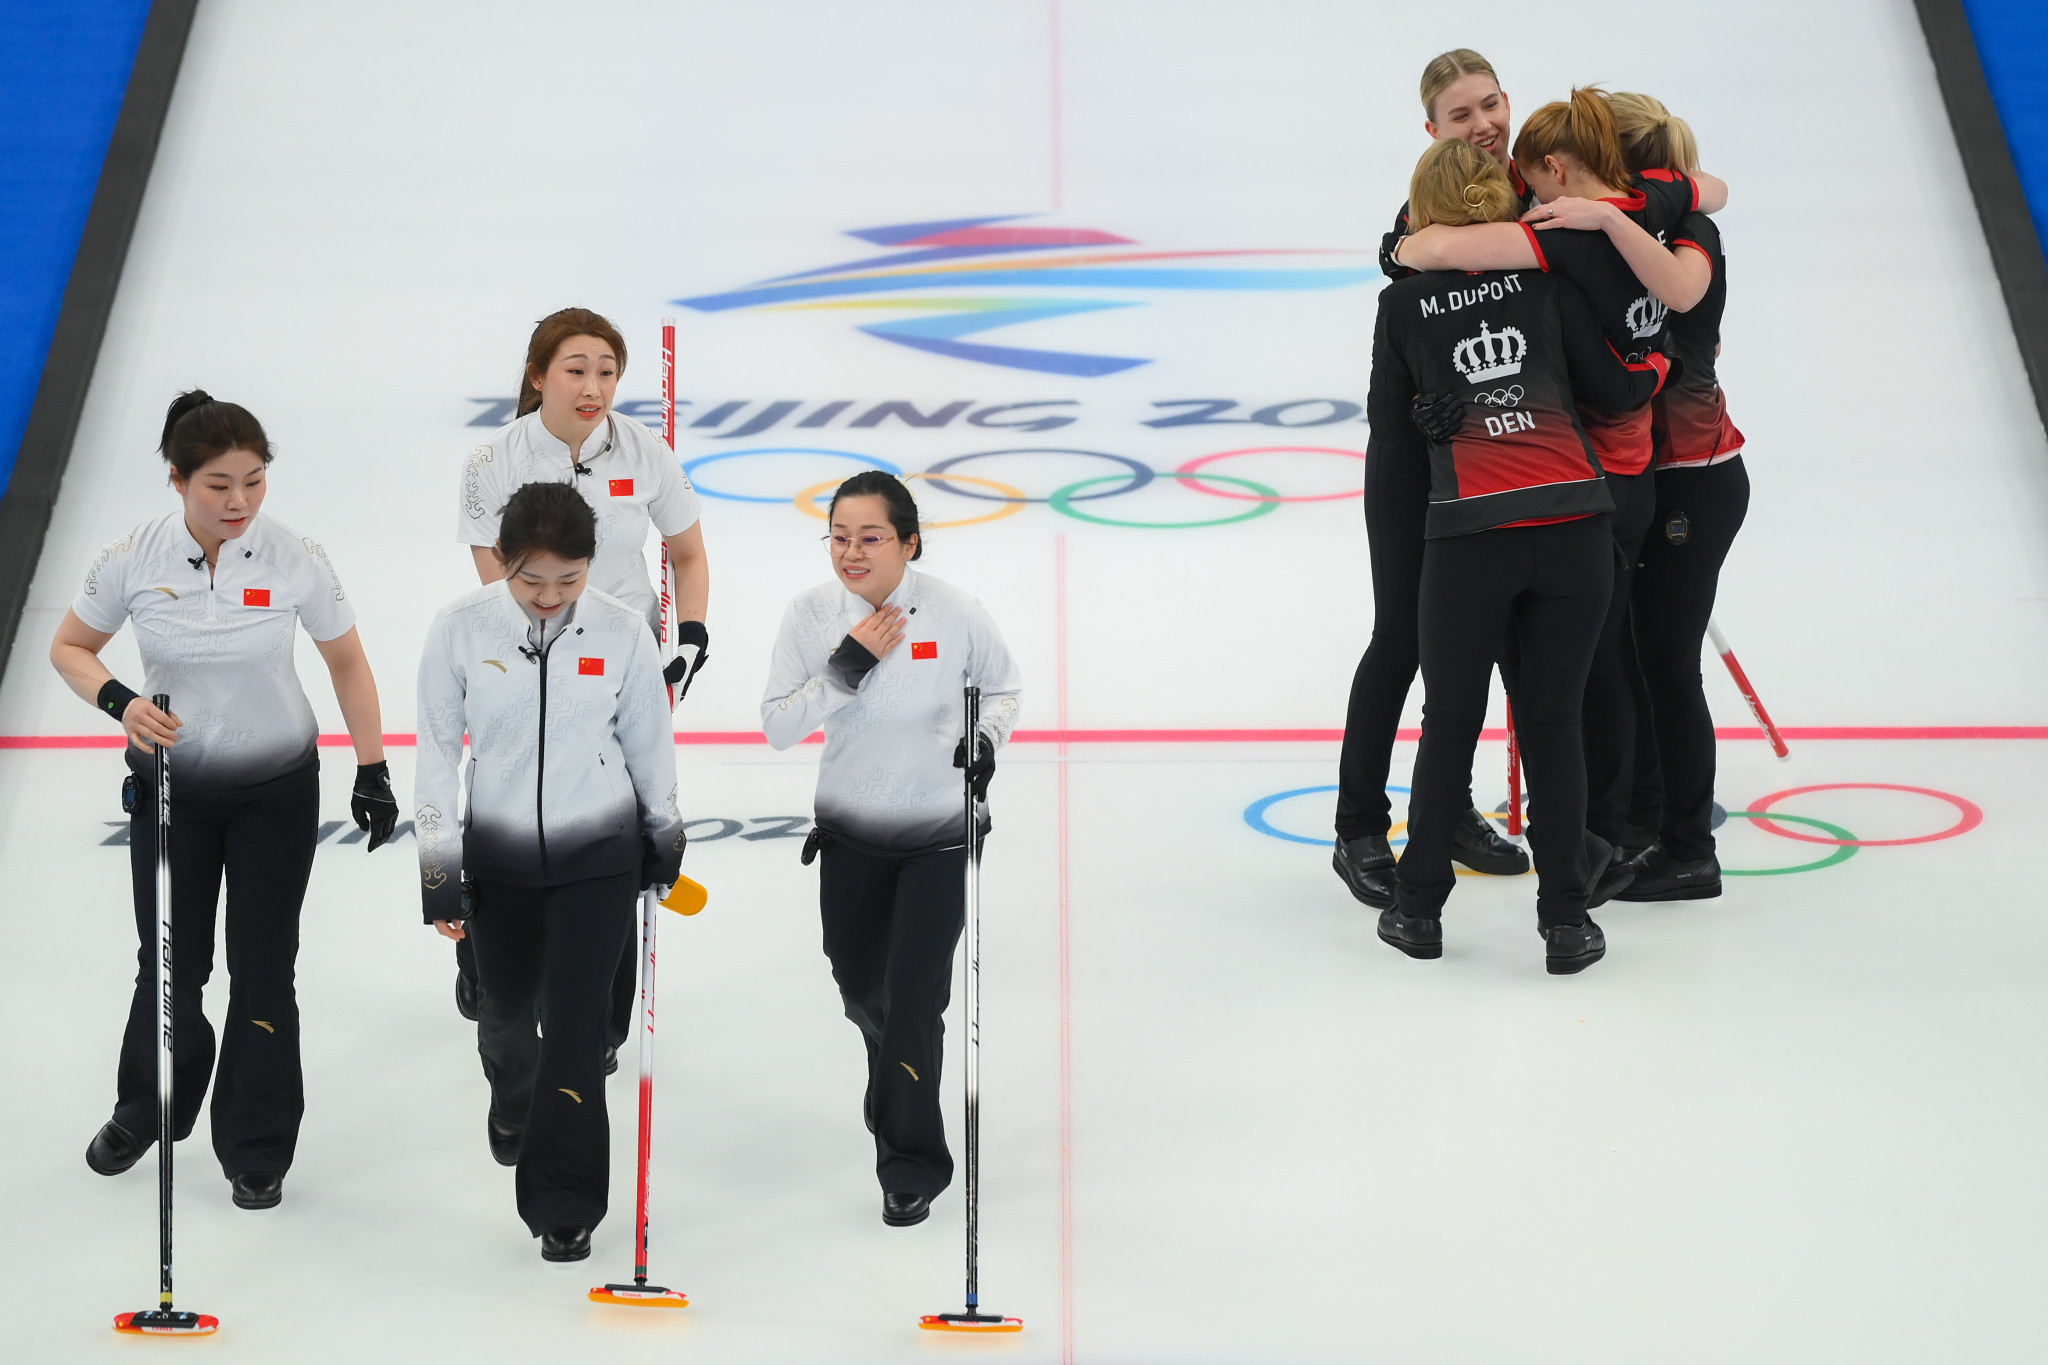 Denmark players, right, celebrate after beating China in the women's curling round robin match ©Getty Images